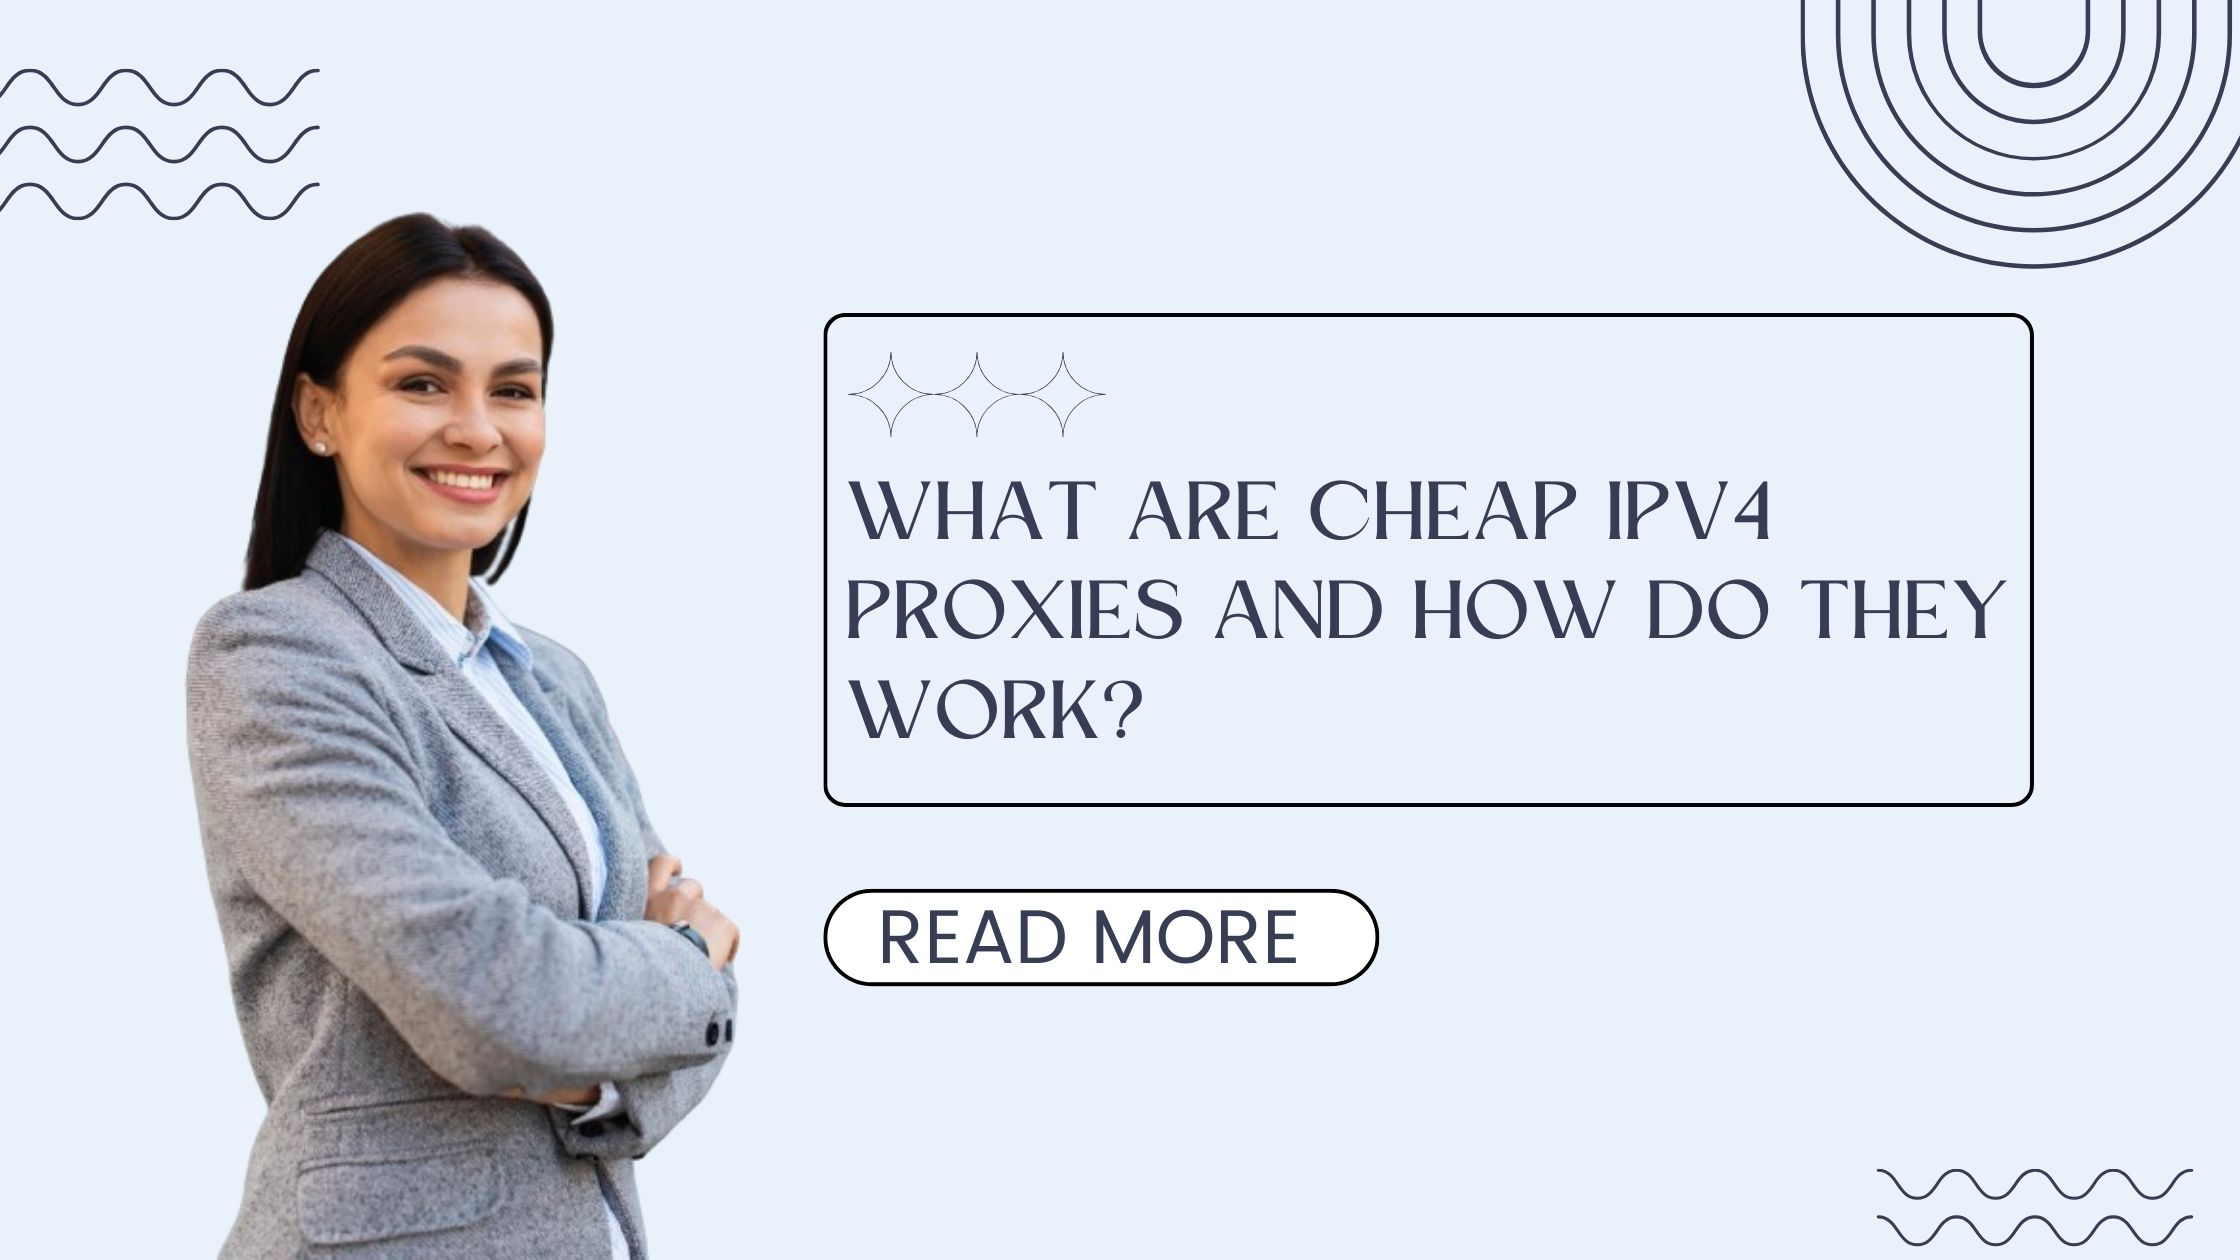 Cheap IPv4 proxies are servers that act as intermediaries between your computer and the internet.